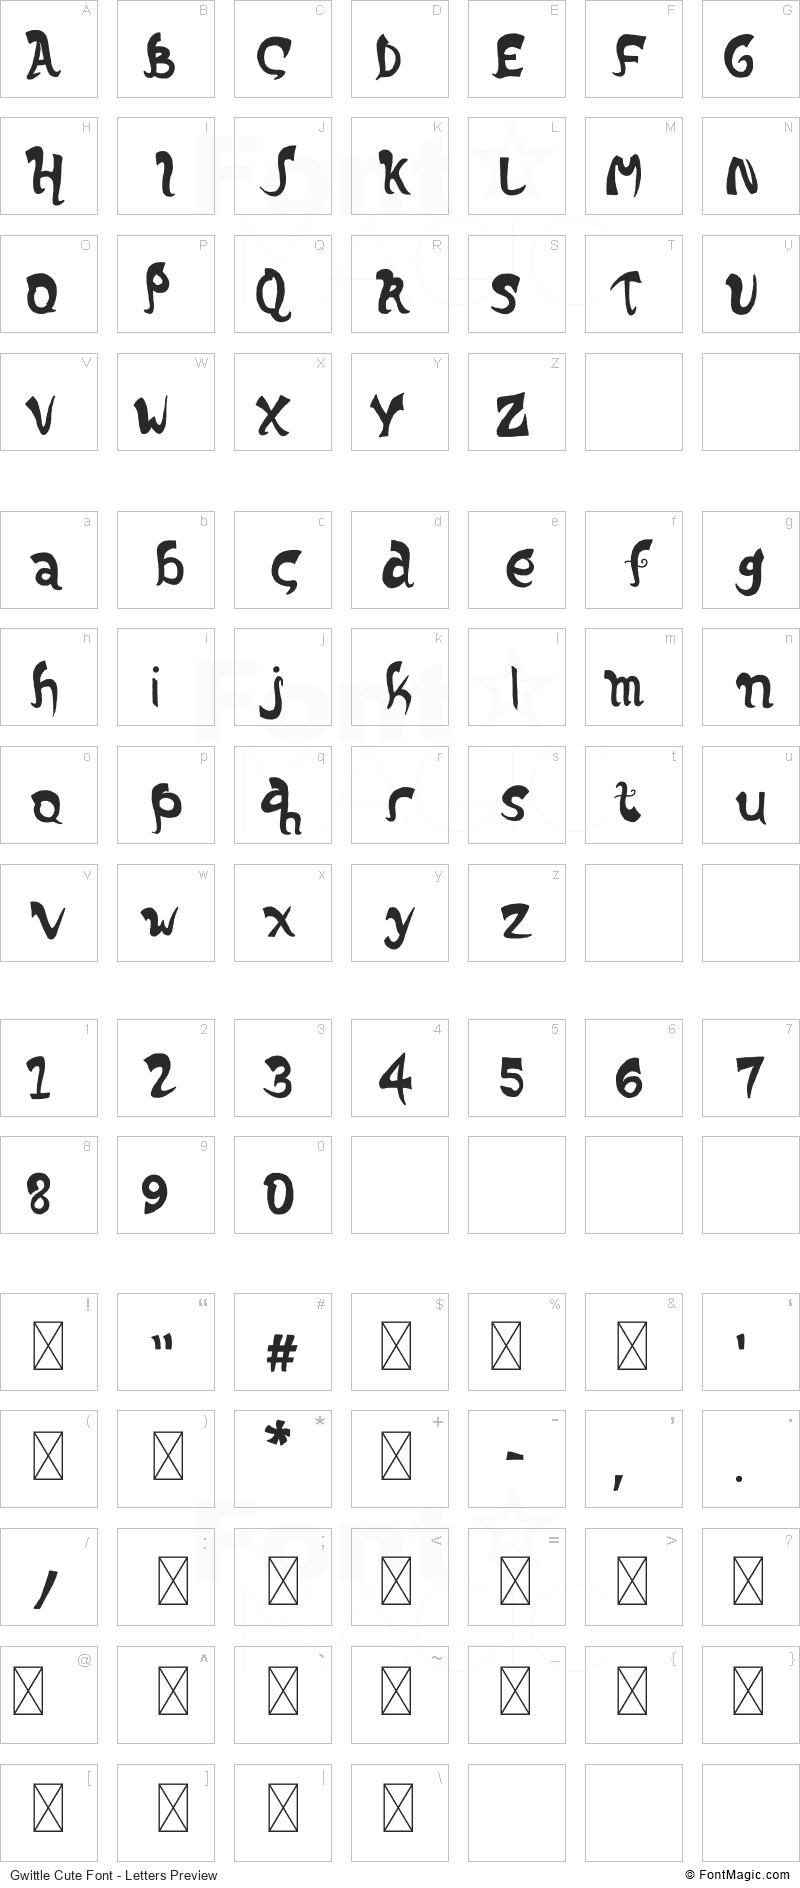 Gwittle Cute Font - All Latters Preview Chart